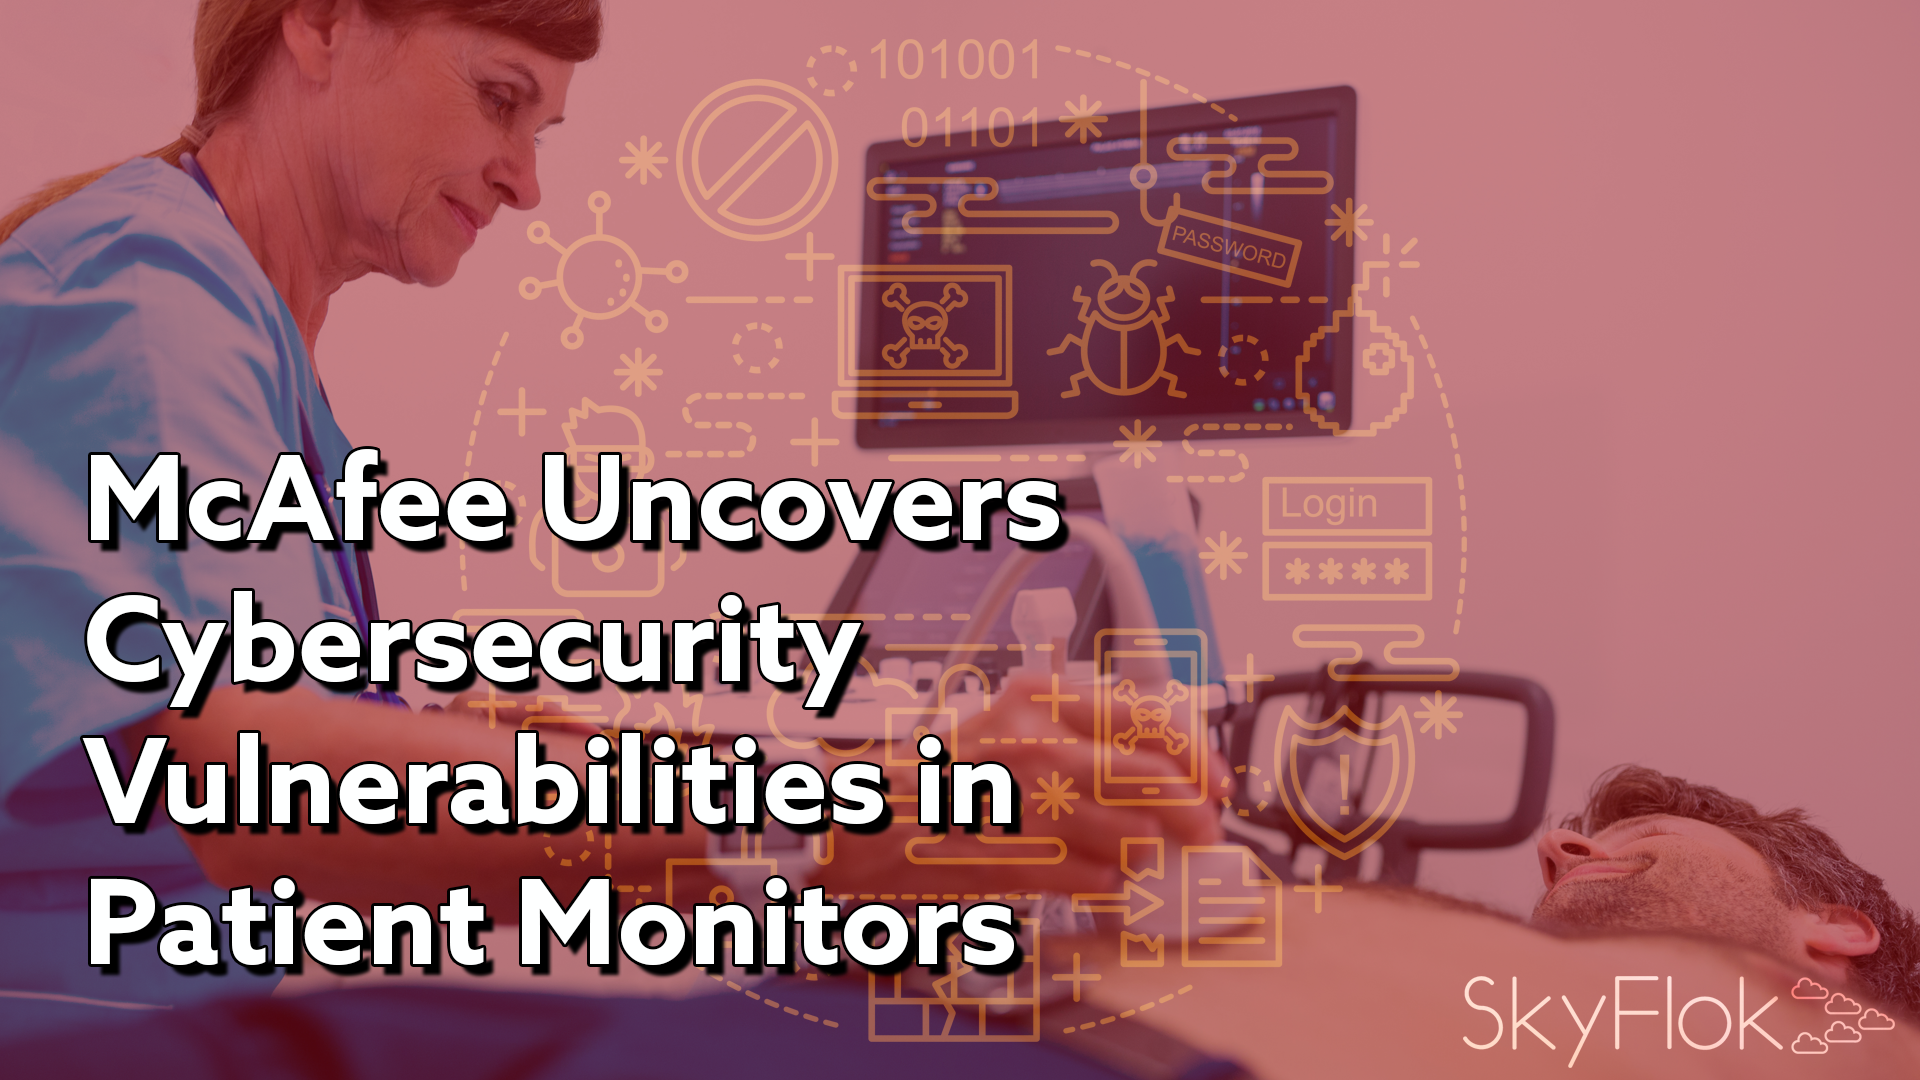 You are currently viewing McAfee Uncovers Cybersecurity Vulnerabilities in Patient Monitors